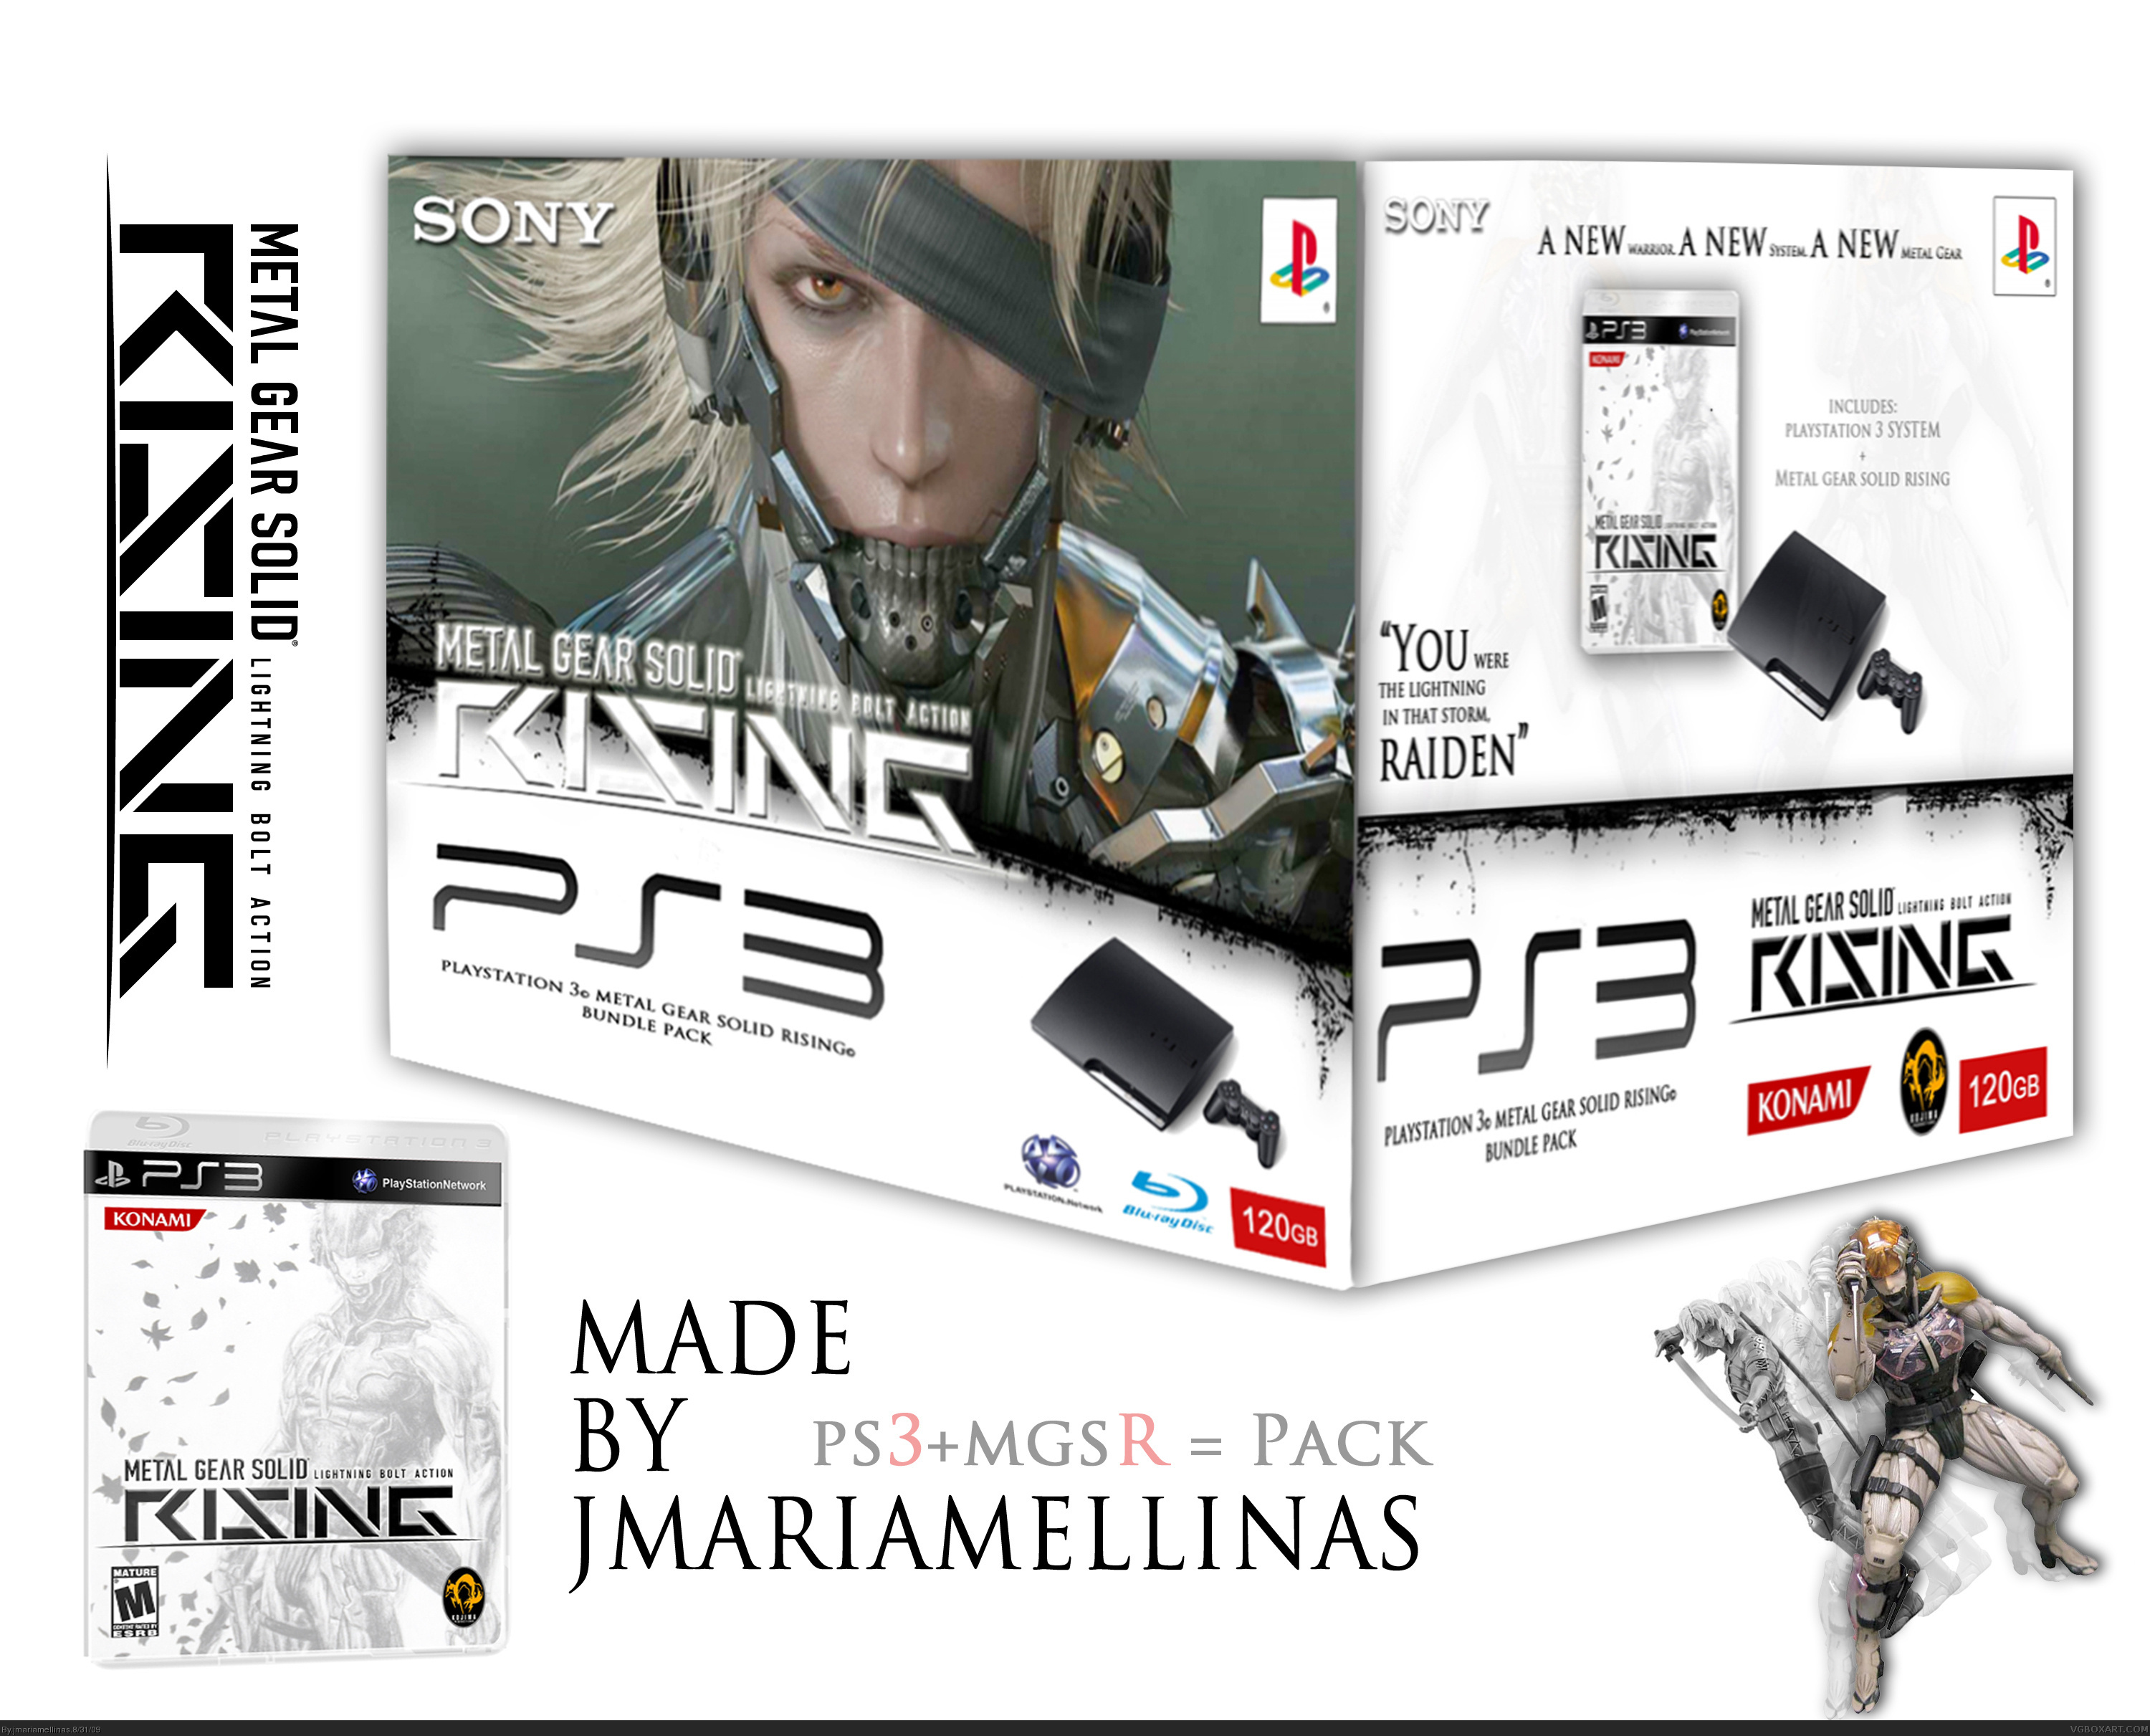 Metal Gear Solid Rising PLAYSTATION 3 Pack box cover